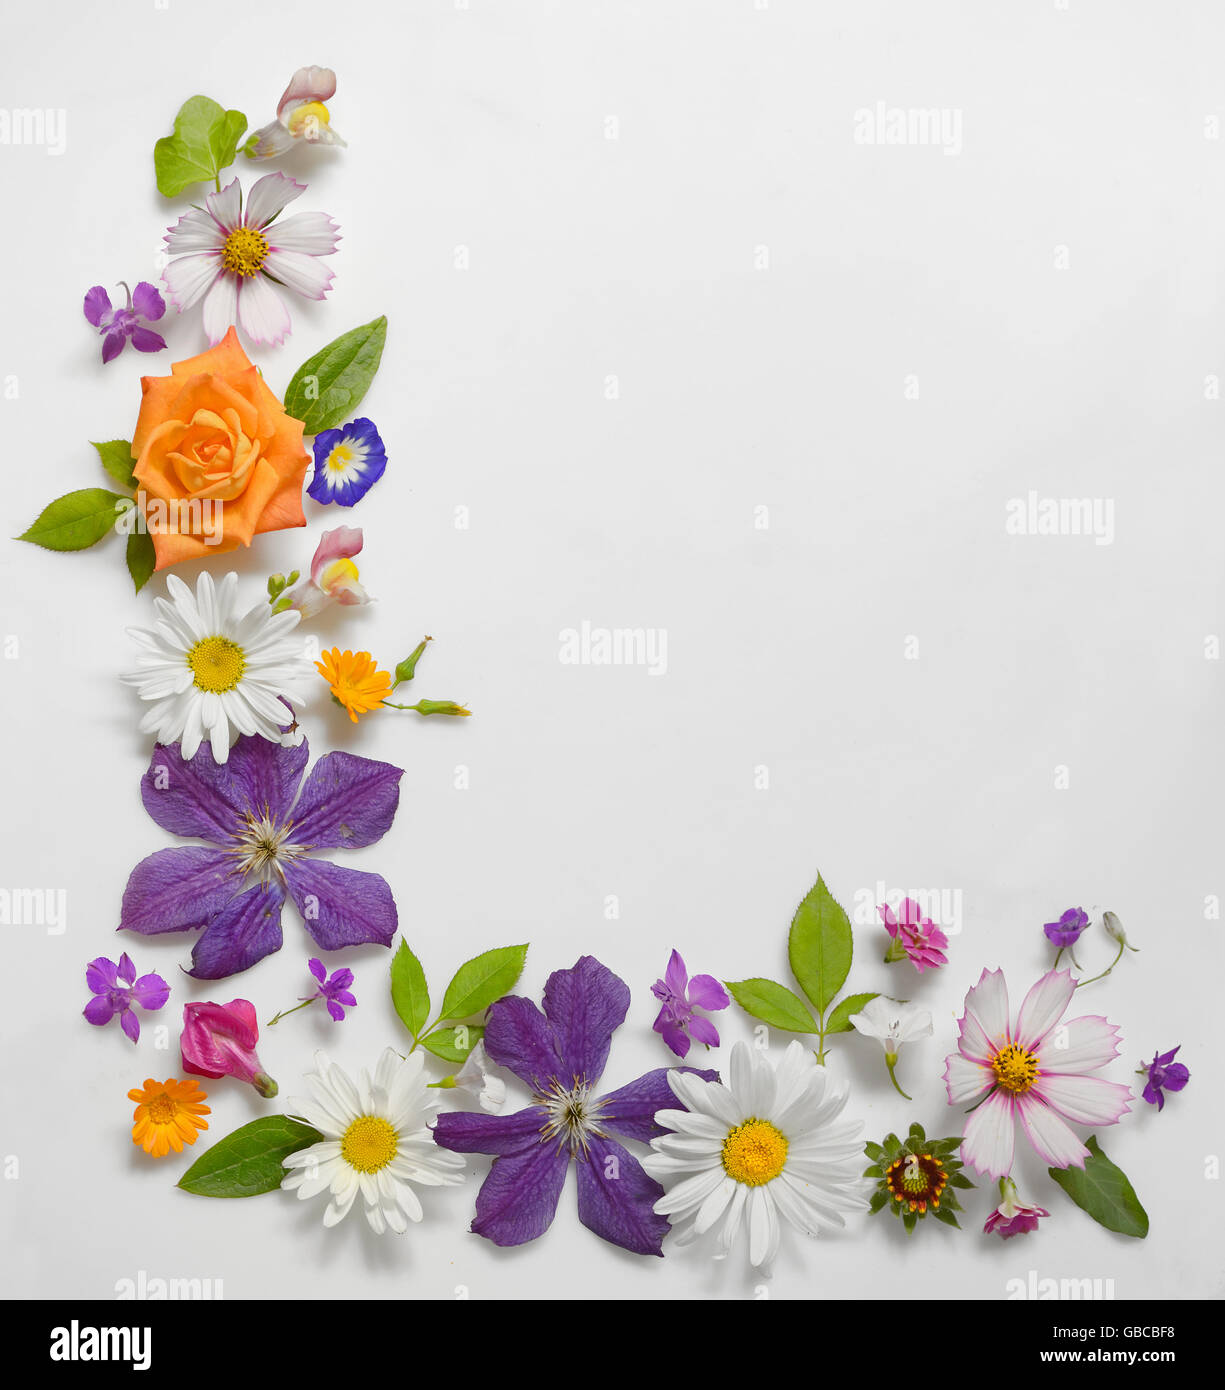 Frame of Various Flowers Isolated on White Background Stock Photo